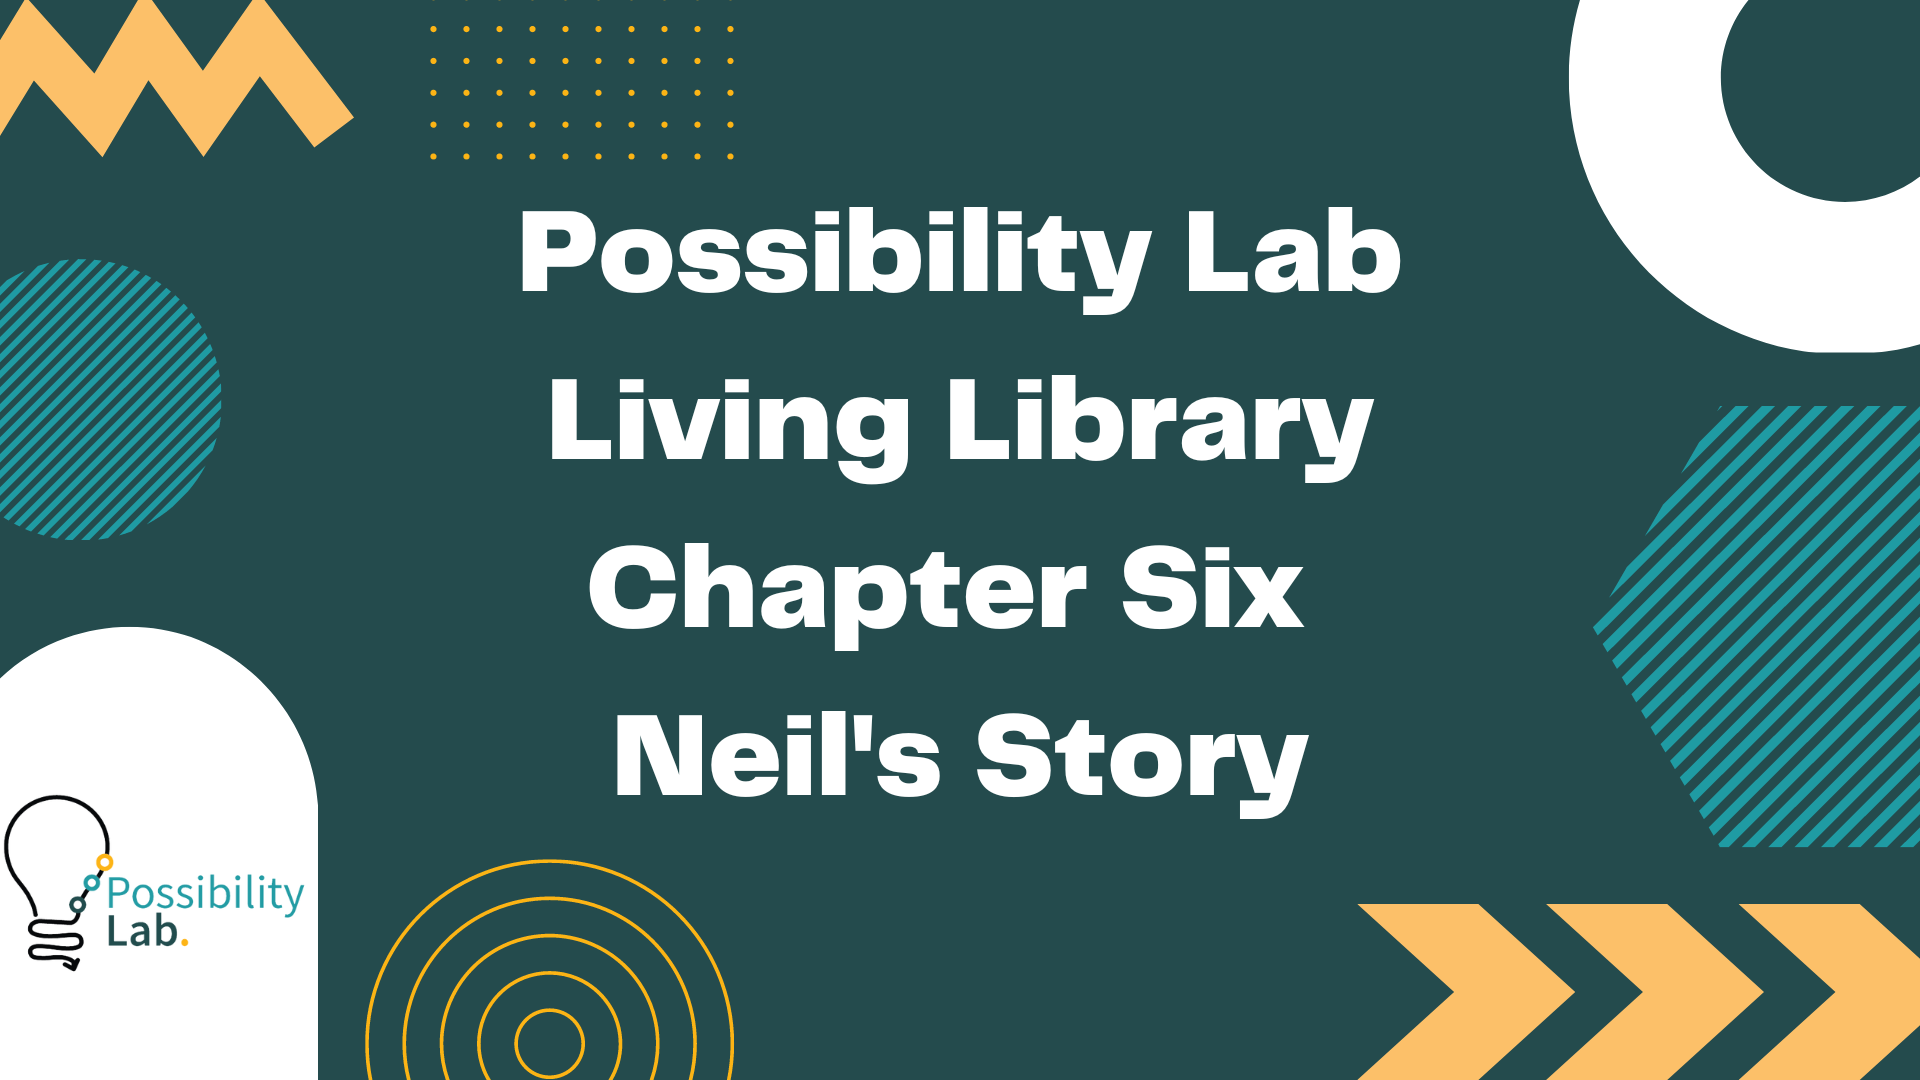 A slide from our living library videos. It has a green background and squiggle designs in white, lighter green and orange. The possibility lab logo is on the bottom left and text on the slide reads Possibility Lab Living Library Chapter Six Neil's Story